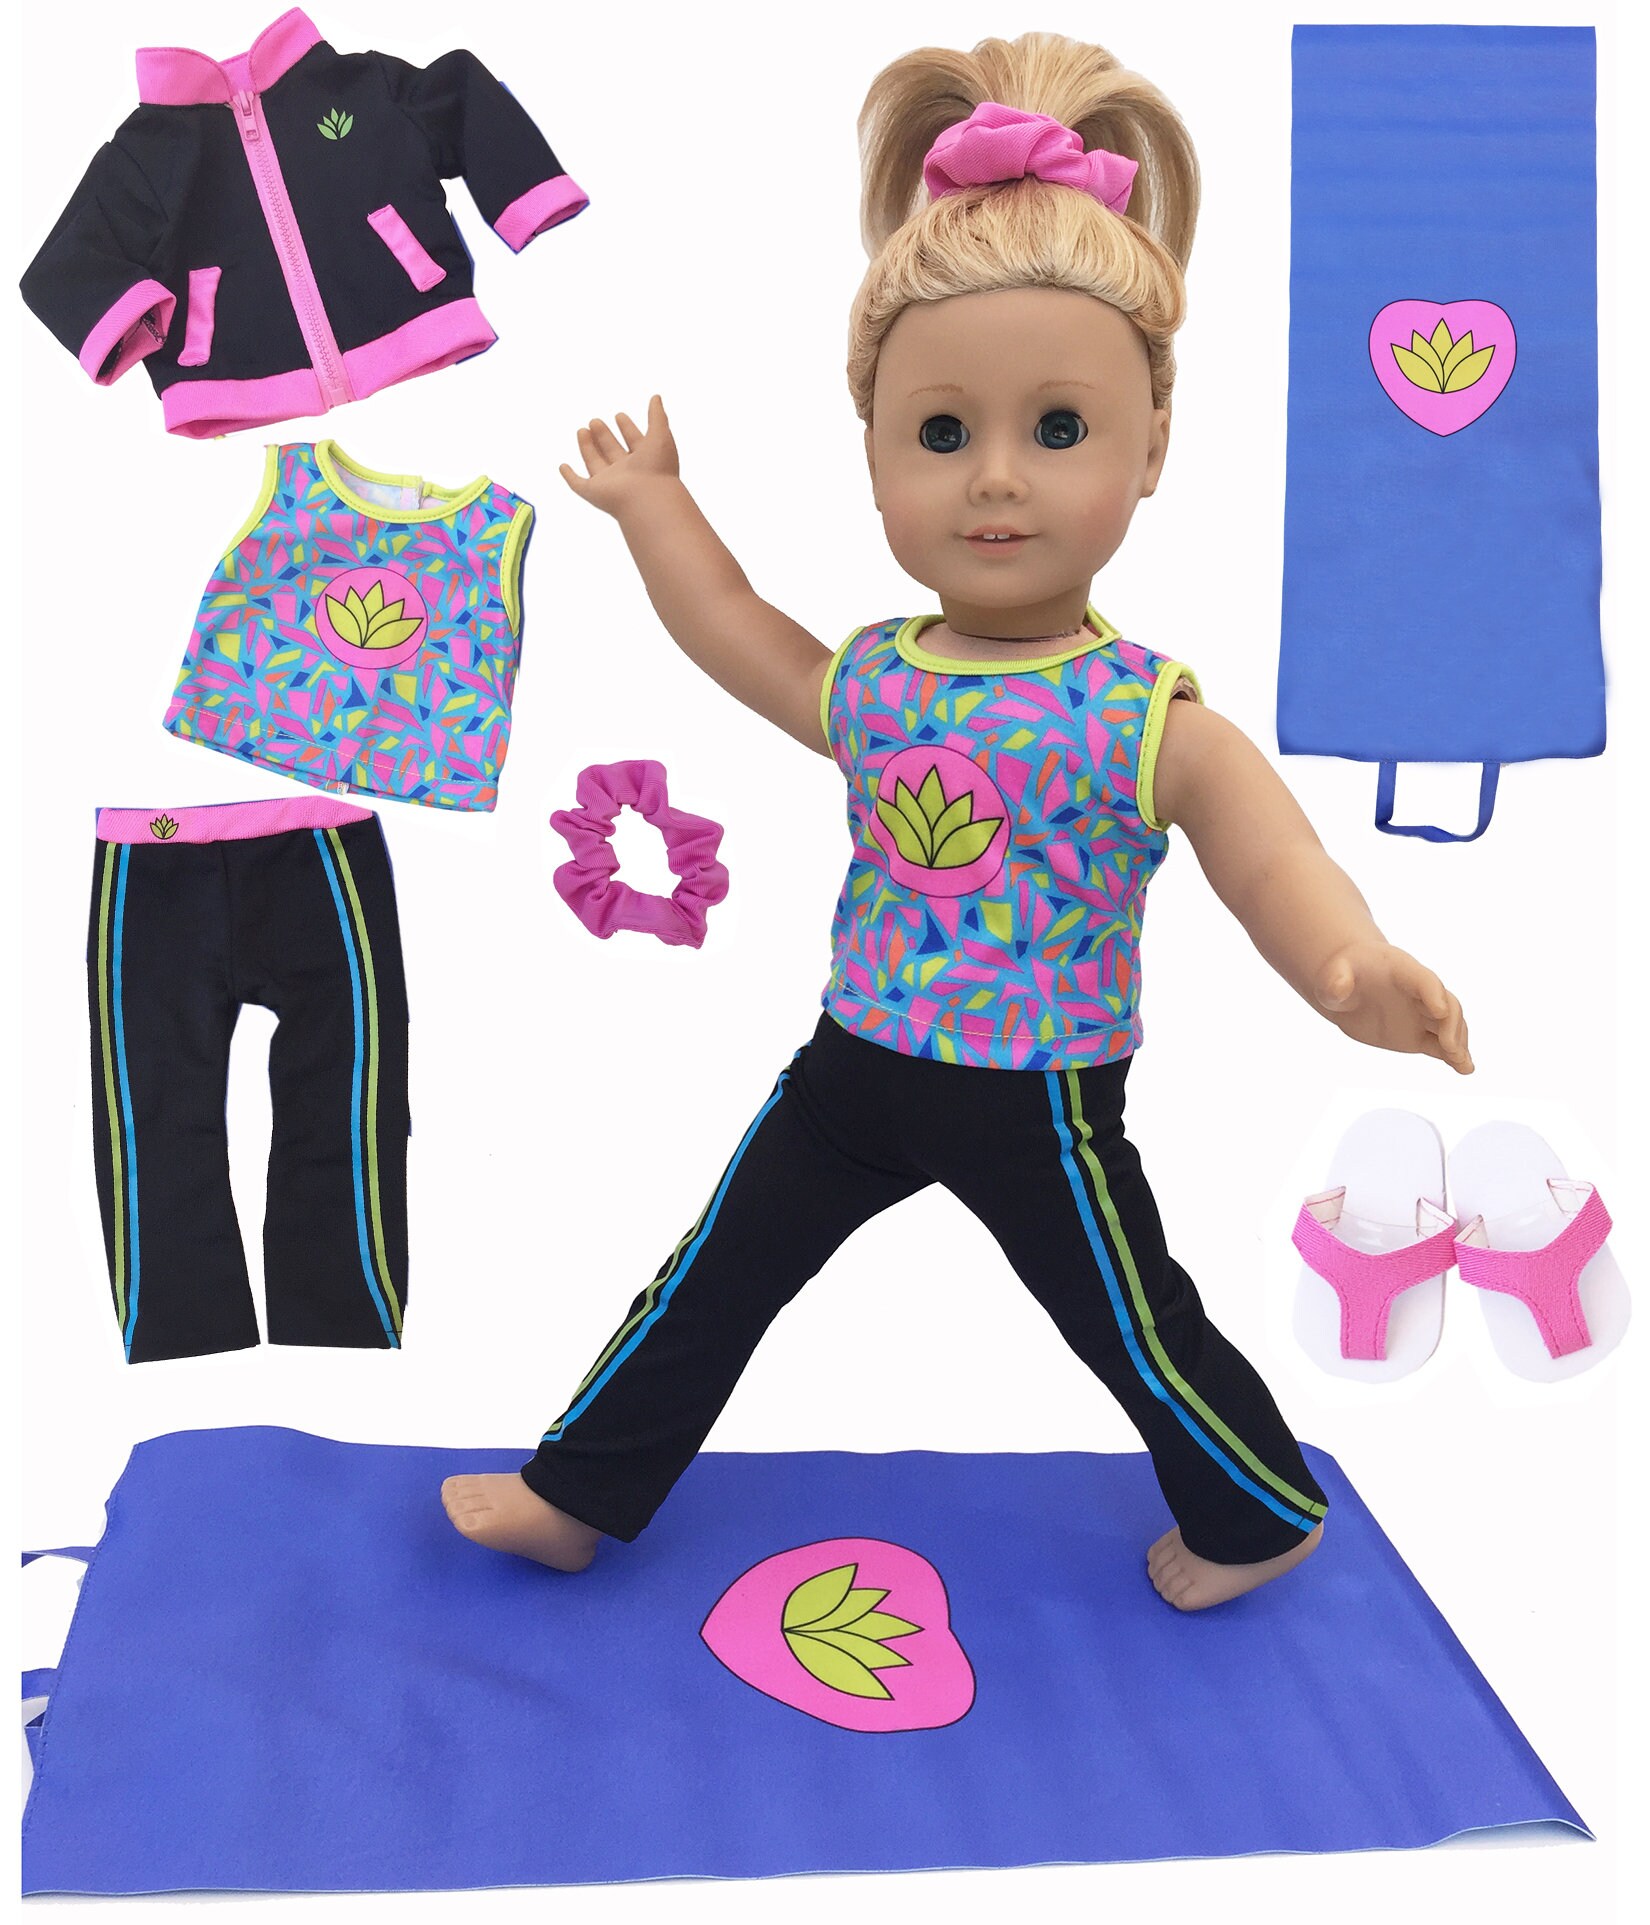 18 Doll Clothes-18 Doll YOGA OUTFIT Fits American Girl Dolls 6 Pc Deluxe  Set yoga Mat Sandals-top-yoga Jacket-yoga Pants-scrunchie 